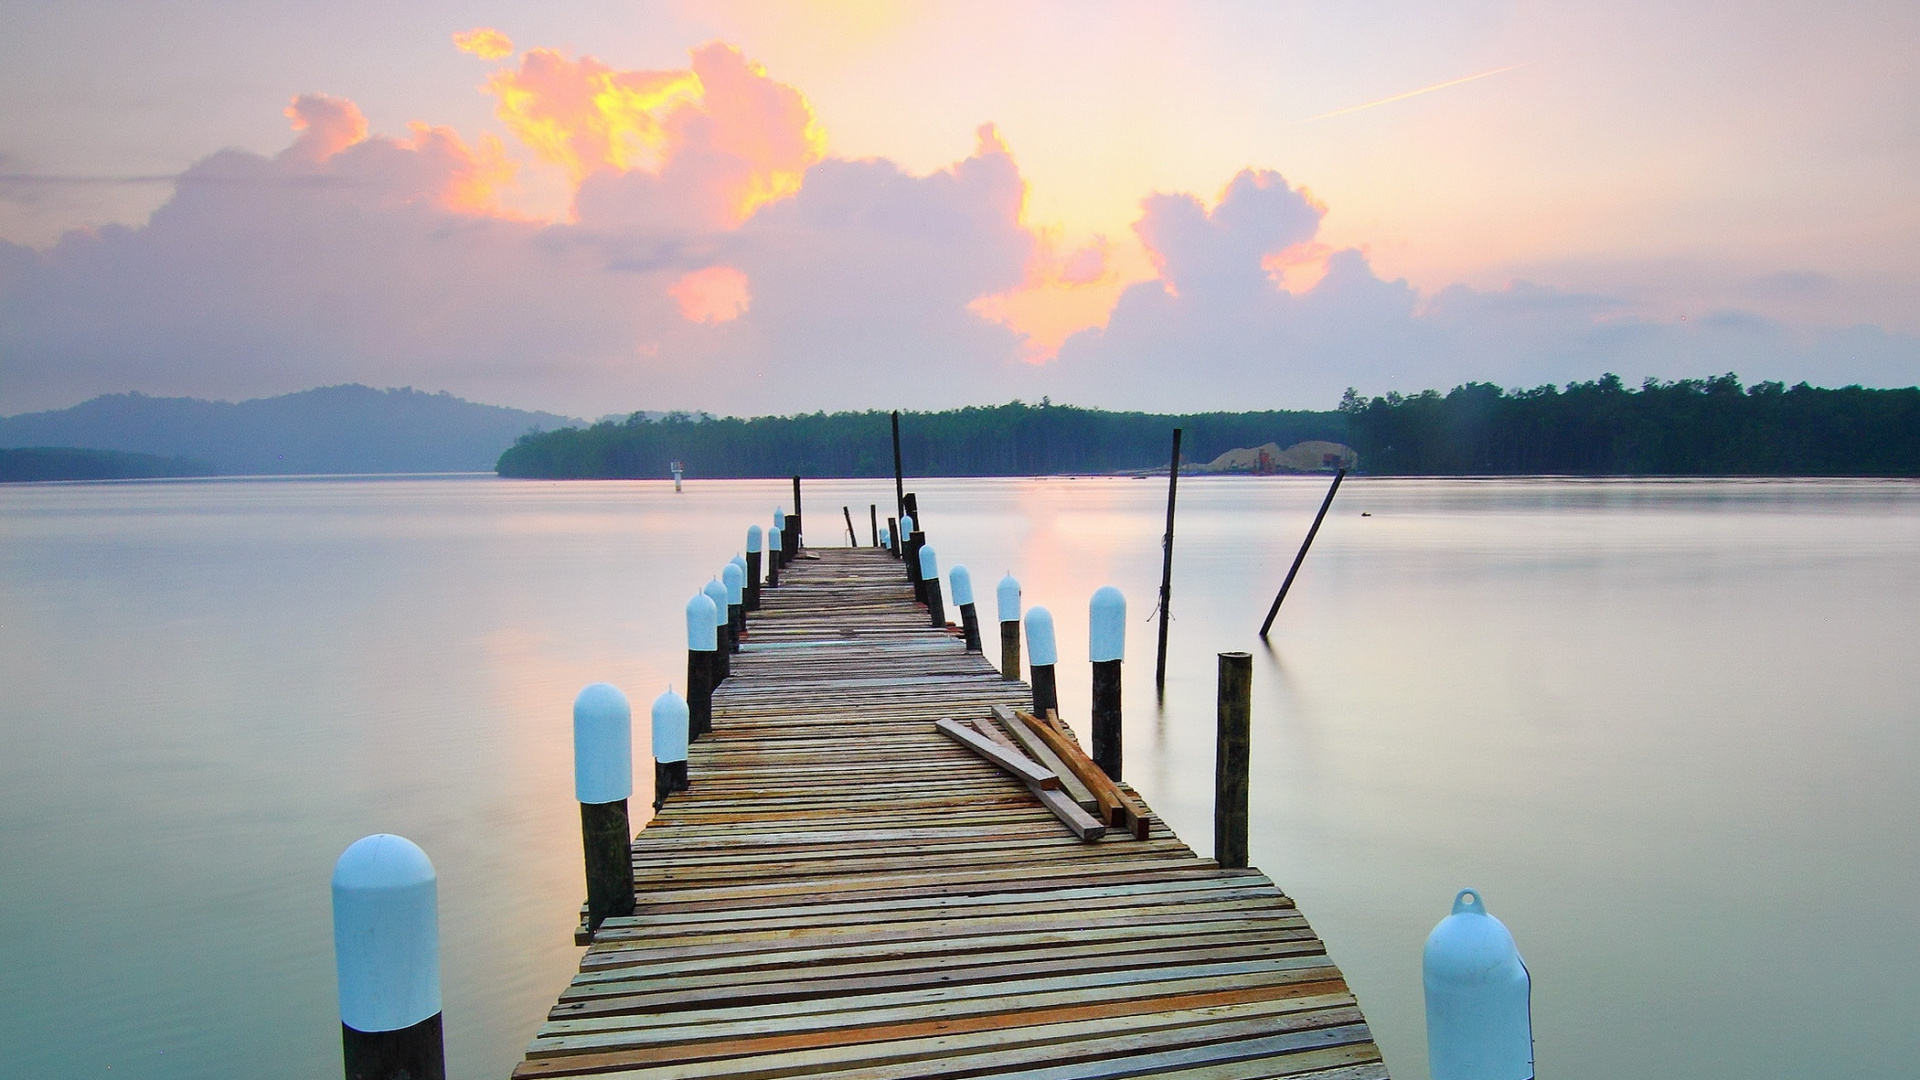 Brown Wooden Dock on Lake During Sunset. Wallpaper in 1920x1080 Resolution